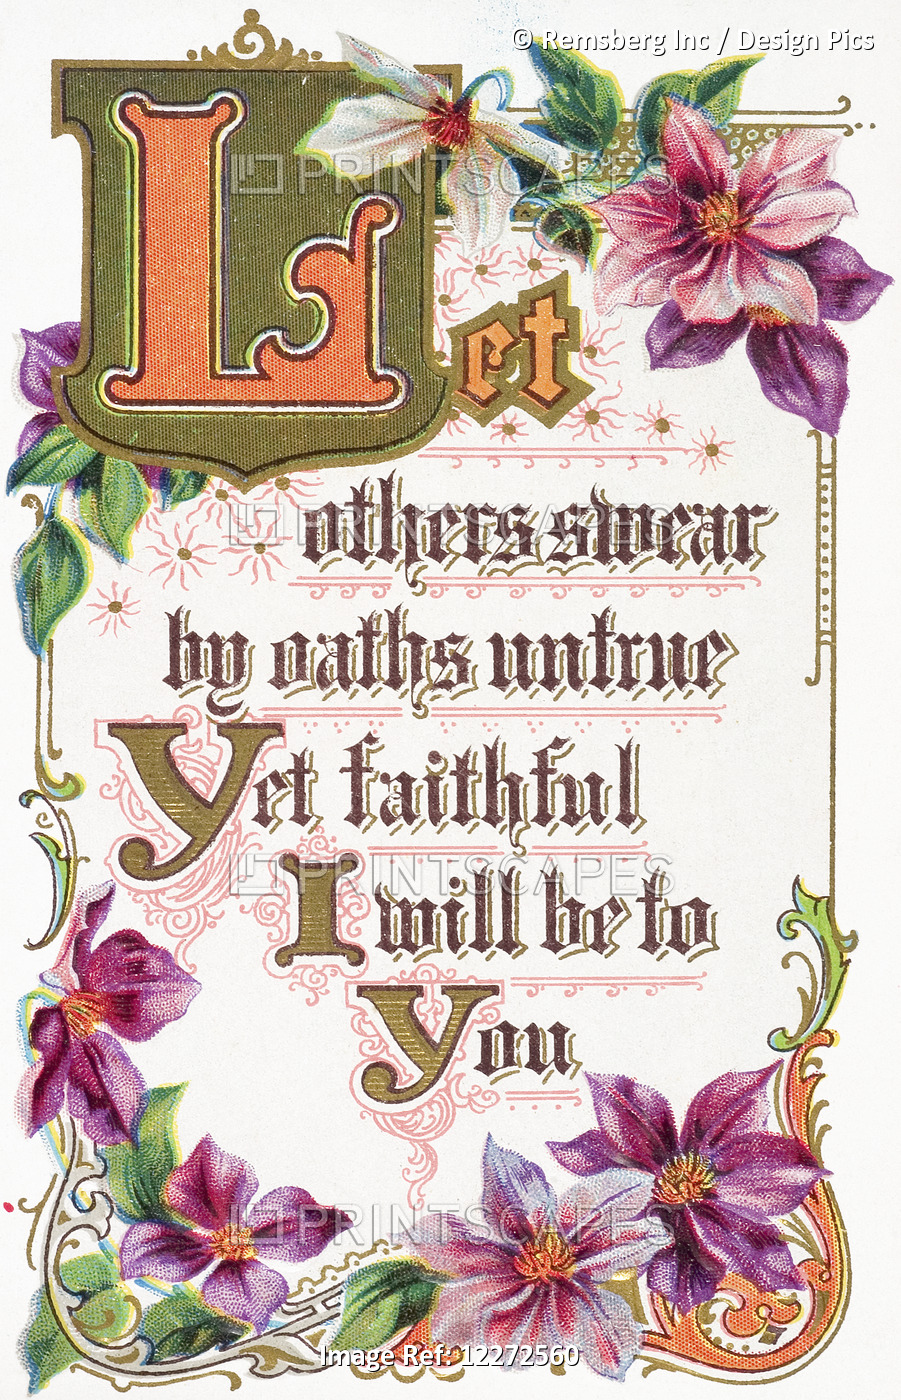 Quote From Vintage Greeting Card With Floral Illustrations.